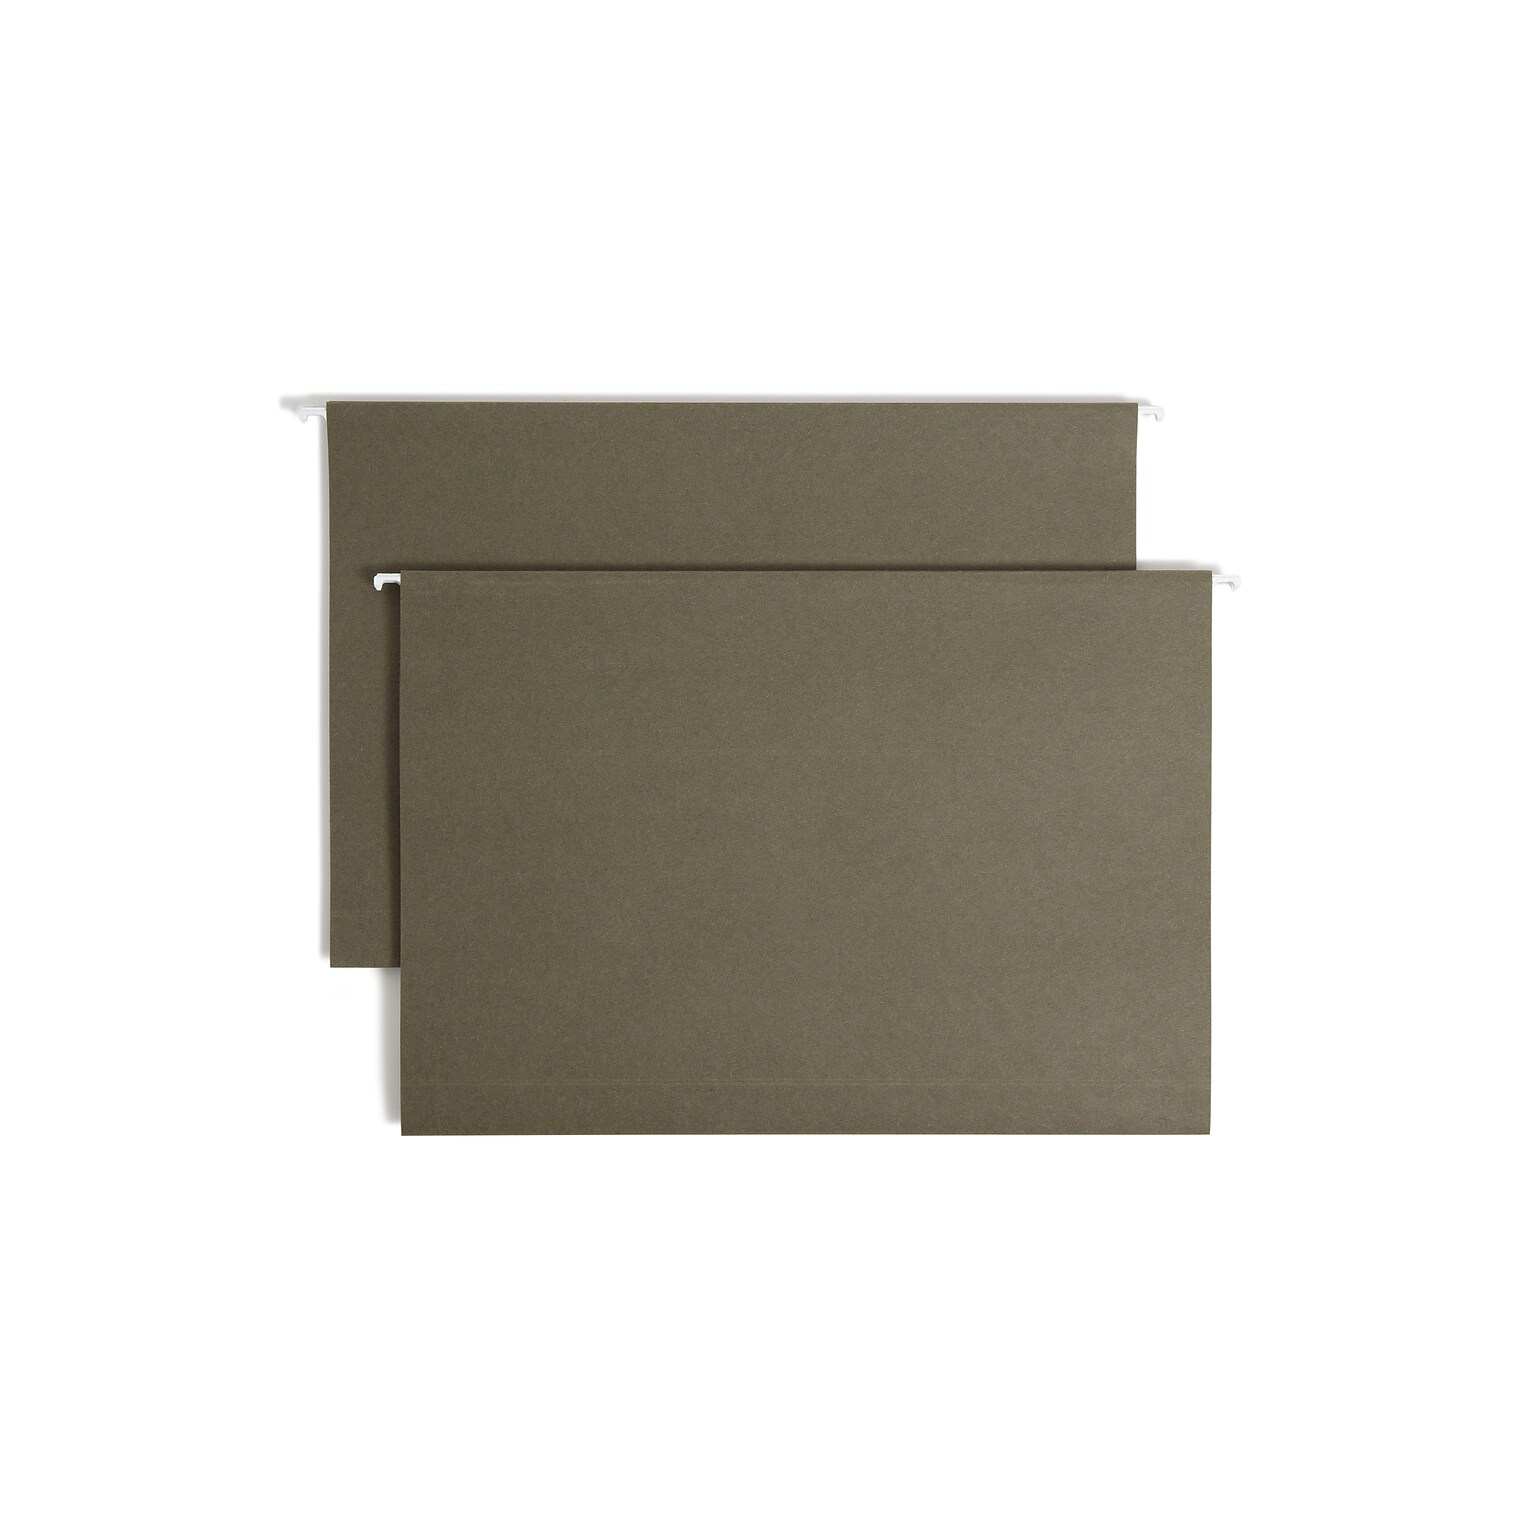 Smead 100% Recycled Hanging File Folders, 2 Expansion, Legal Size, Standard Green, 25/Box (65095)